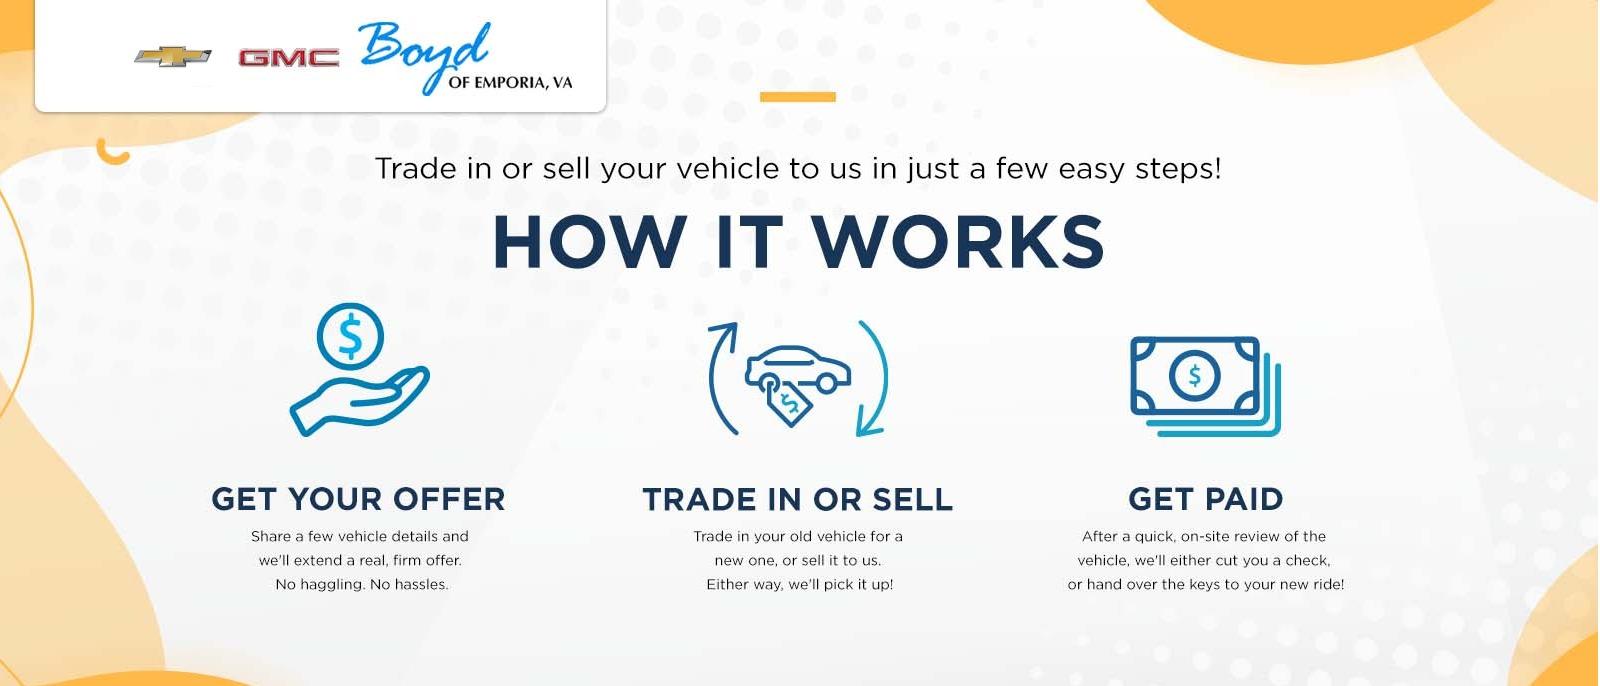 Trade in or sell your vehicle to us in just a few easy steps! HOW IT WORKS GET YOUR OFFER Share a few vehicle details and we'll extend a real, firm offer No haggling. No hassles. TRADE IN OR SELL Trade in your old vehicle for a new one, or sell it to us. Either way, we'll pick it up! GET PAID After a quick, on-site review of the vehicle, we'll either cut you a check. or hand over the keys to your new ride!